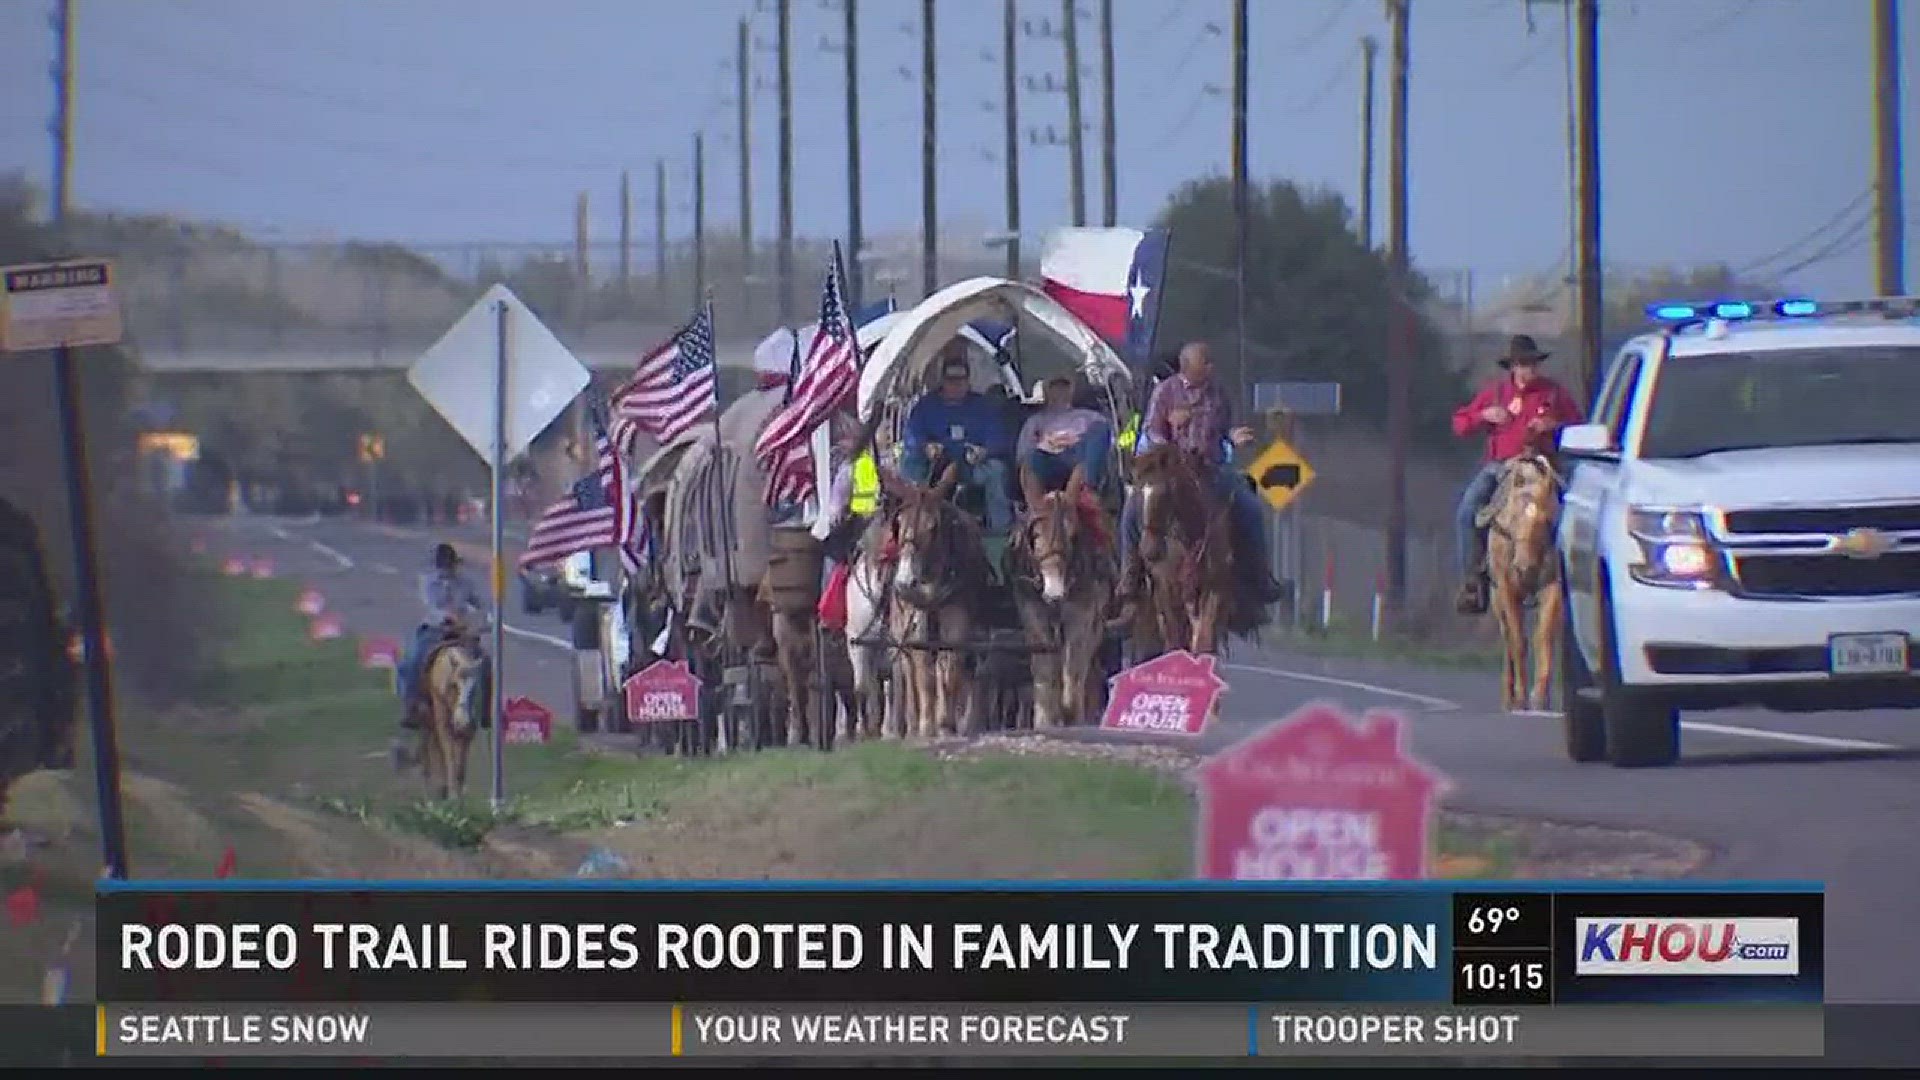 The Houston Livestock Show and Rodeo is just over a week away now and the trail rides are on their way to town.